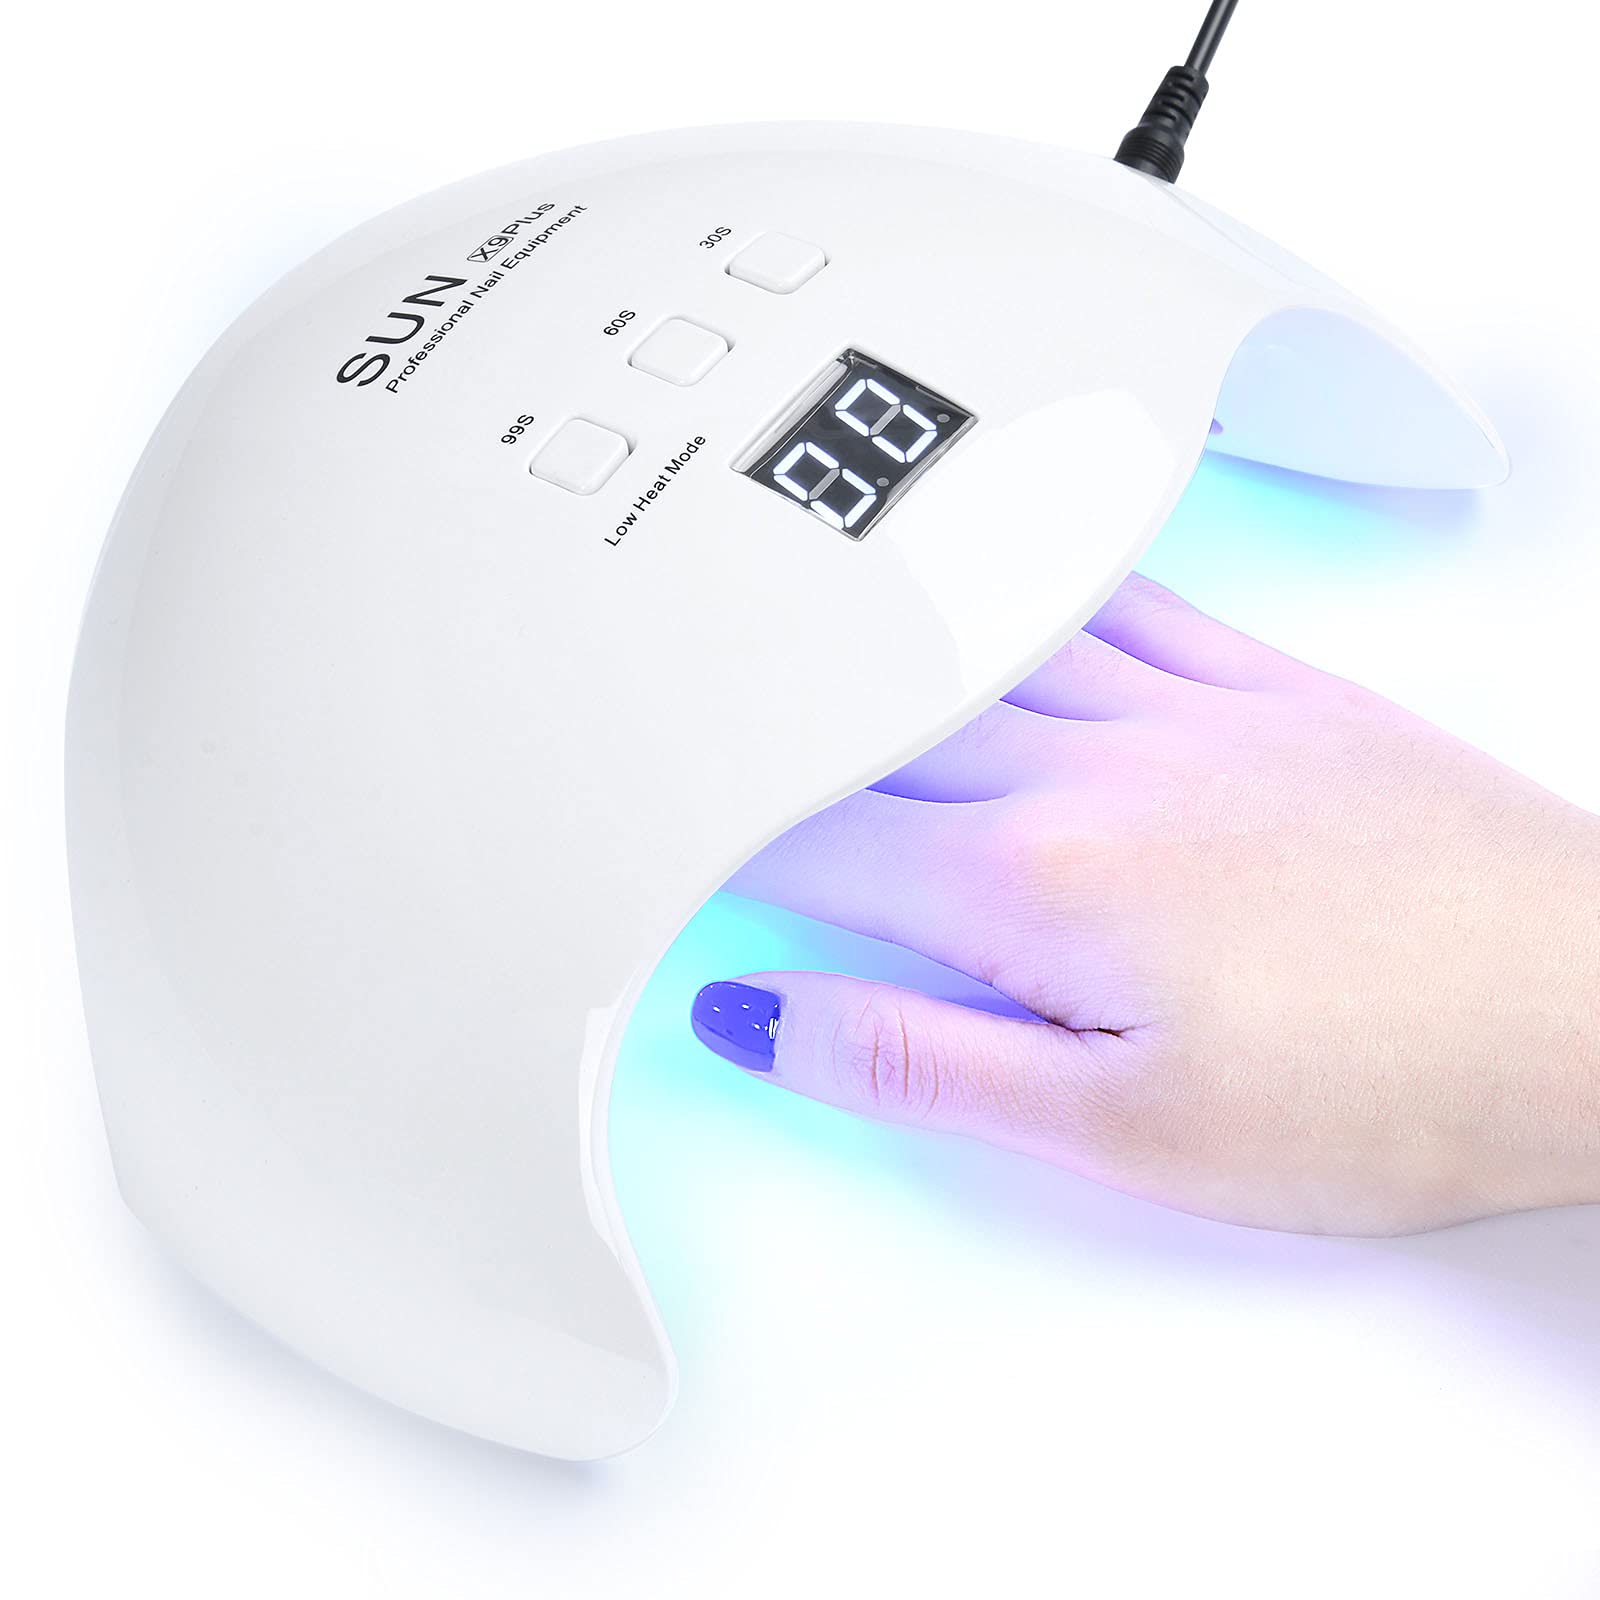 Book Cover 48W LED Nail Lamp, DIOZO Portable Nail Dryer Manicure/Pedicure Curing Lamp with 30s 60s 99s Timer Plus Anti-UV Gloves Gift Suitable for Fingernails and Toenails, Home and Salon